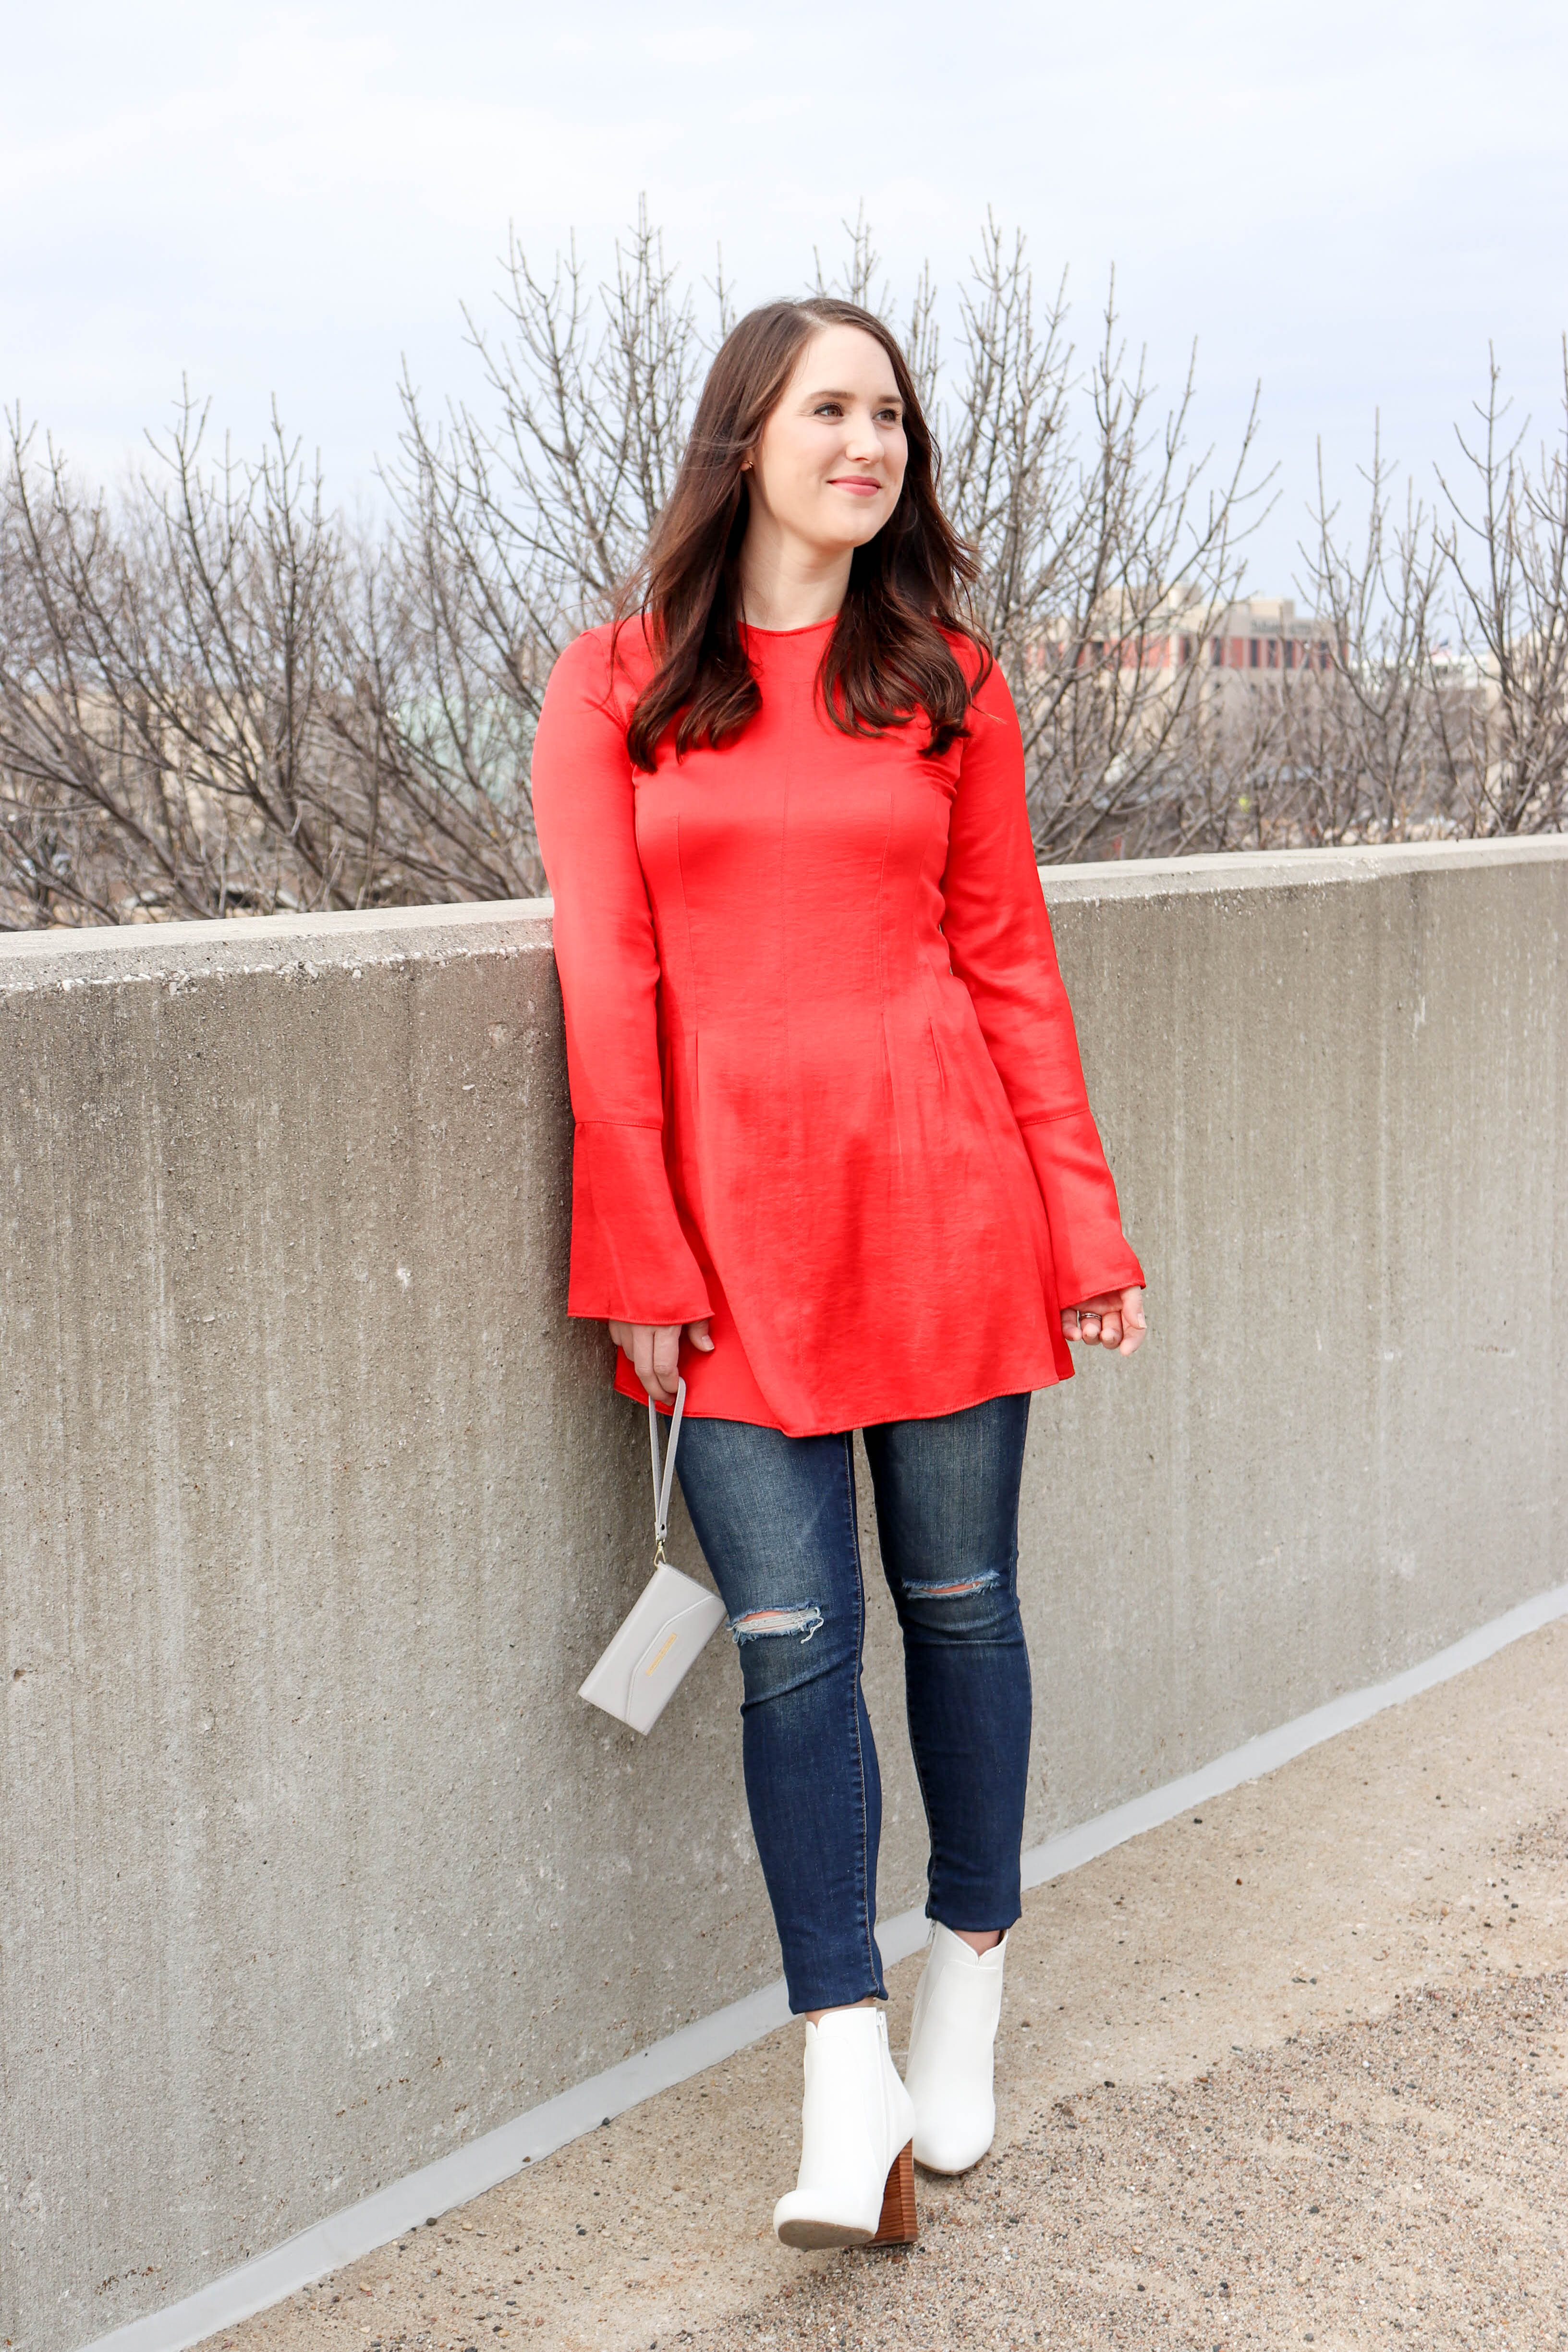 Red Satin Top | My Spring Color Crush